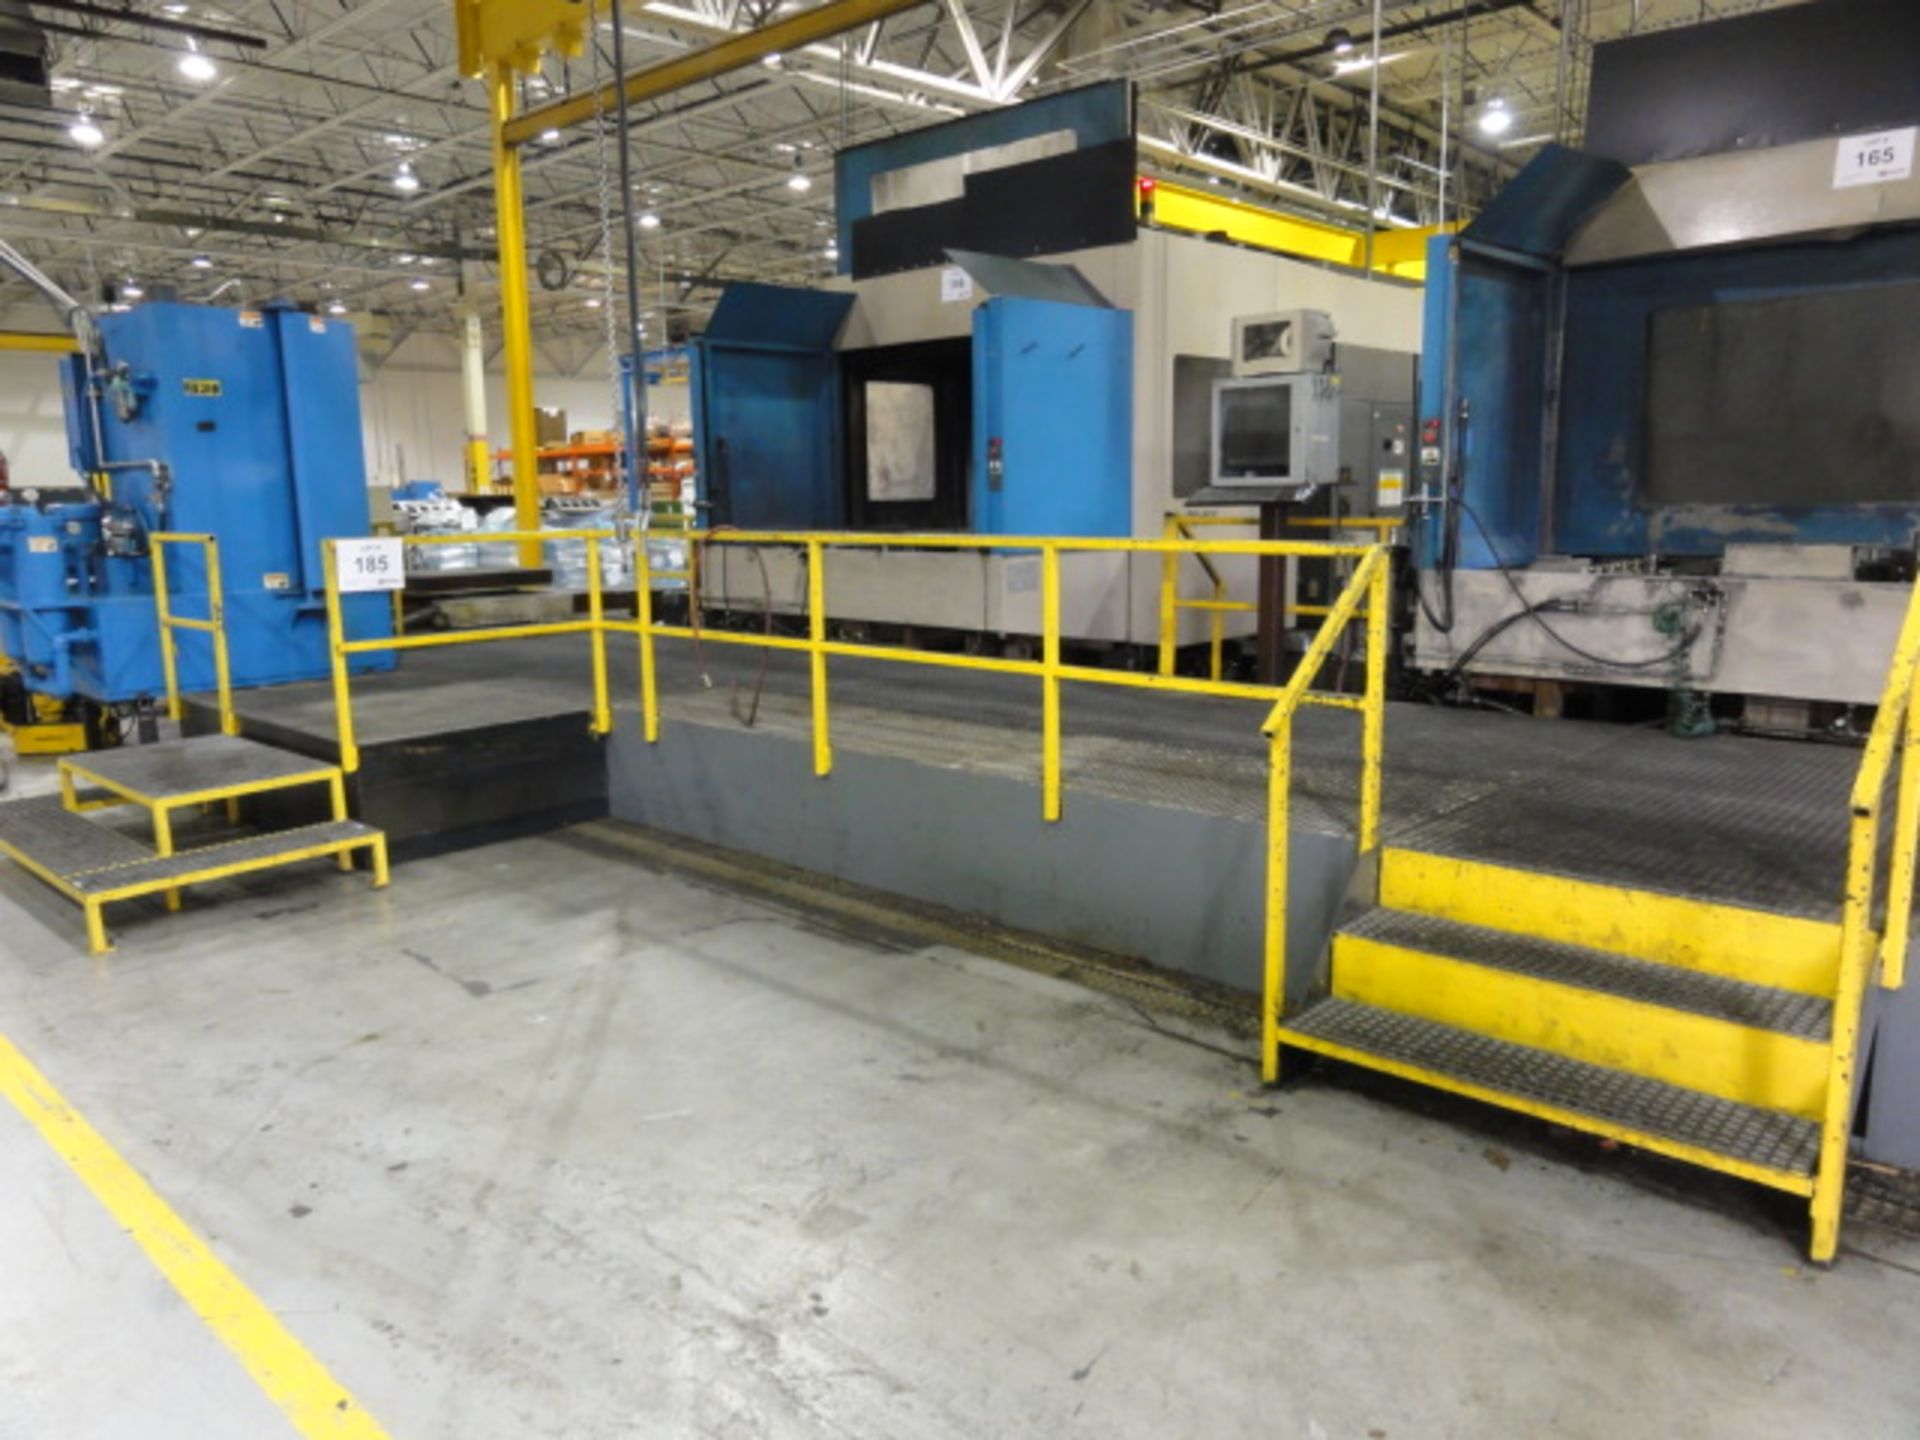 Operator Platform Approx. Size 40' x 10' w/ Anti Skid Grated Decking, (5) Staircases, Associated - Image 2 of 3